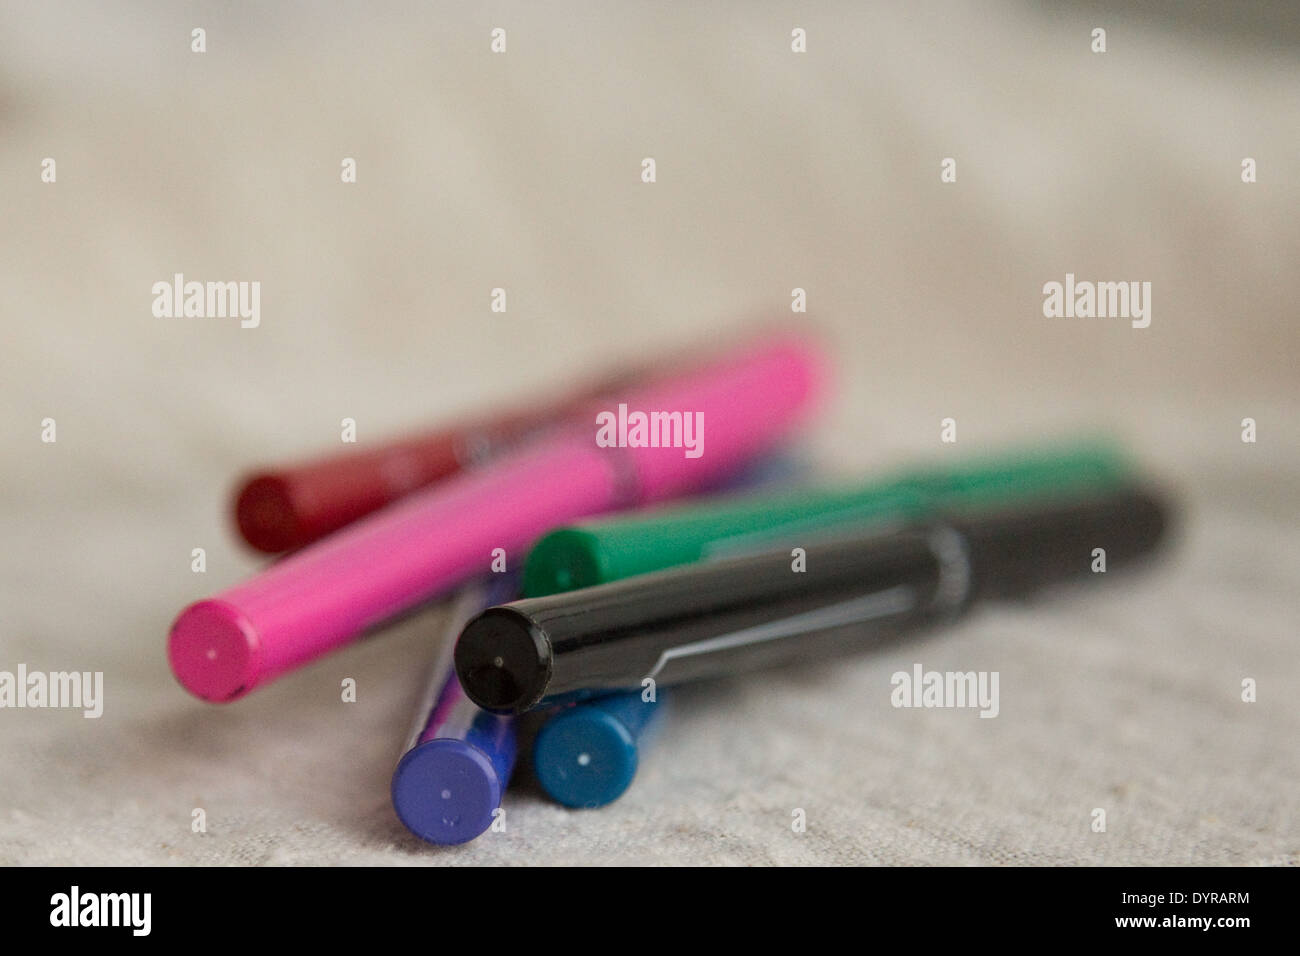 stack of colorful pens on linen background Stock Photo